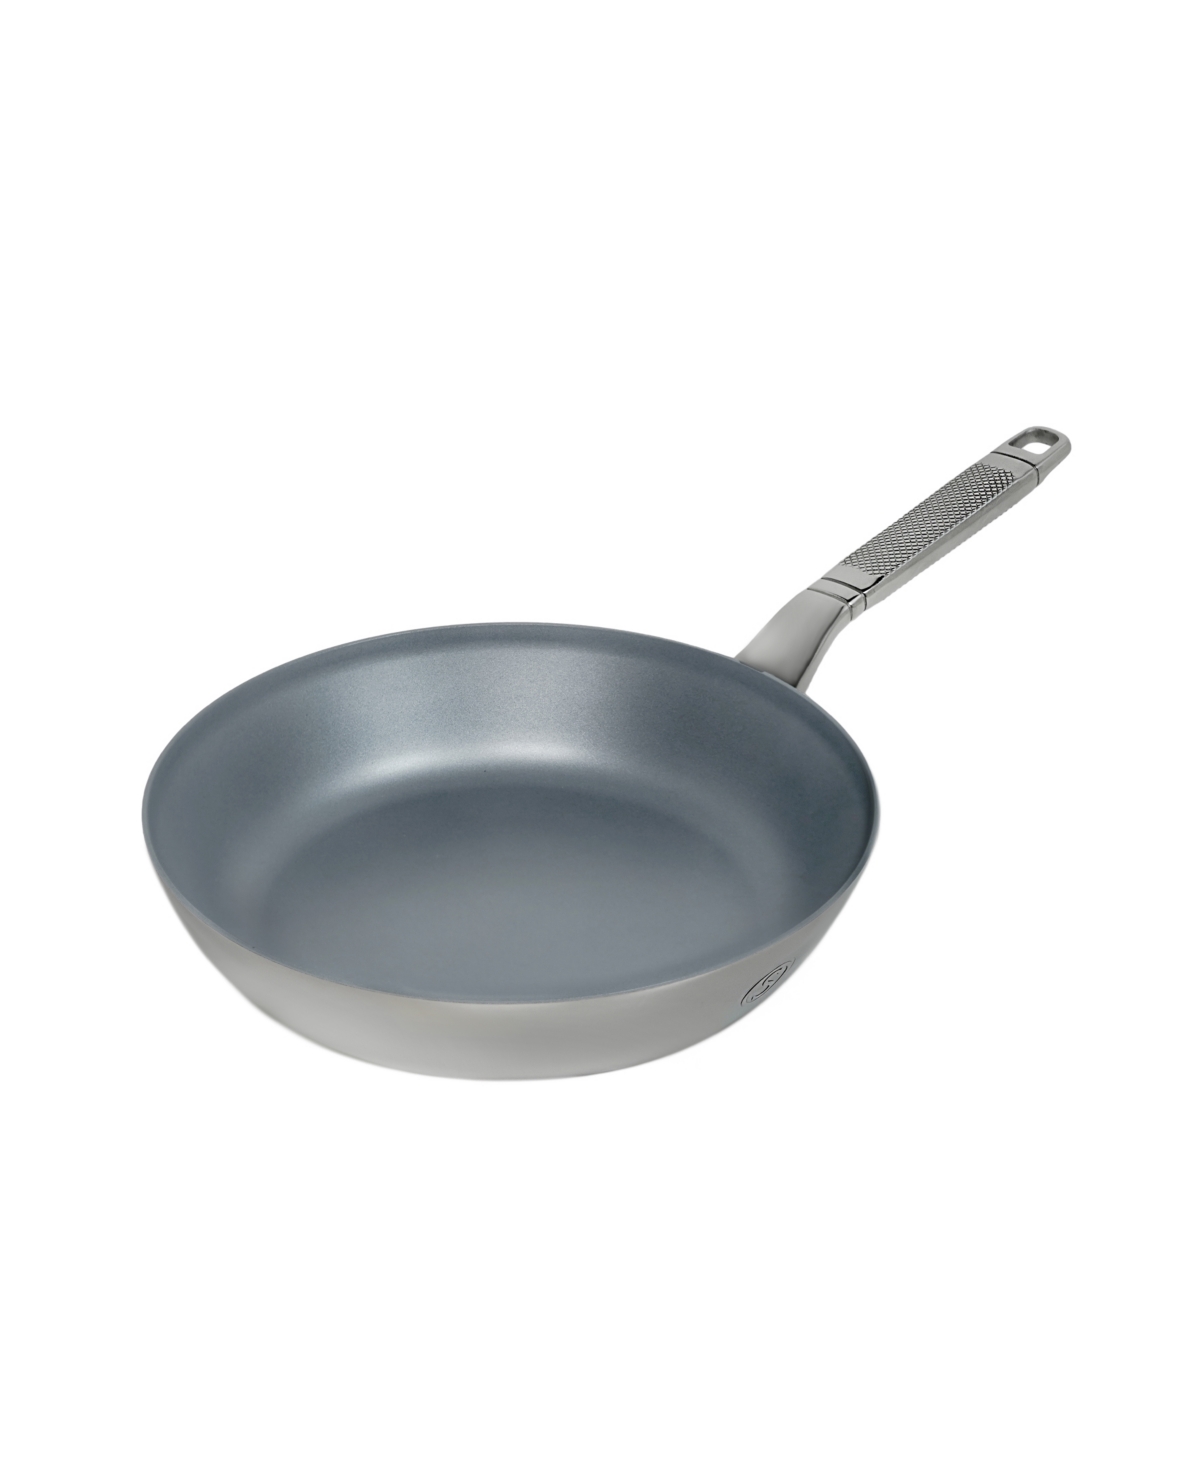 Saveur Selects Tri-ply Stainless Steel 10" Non-stick Open Fry Pan